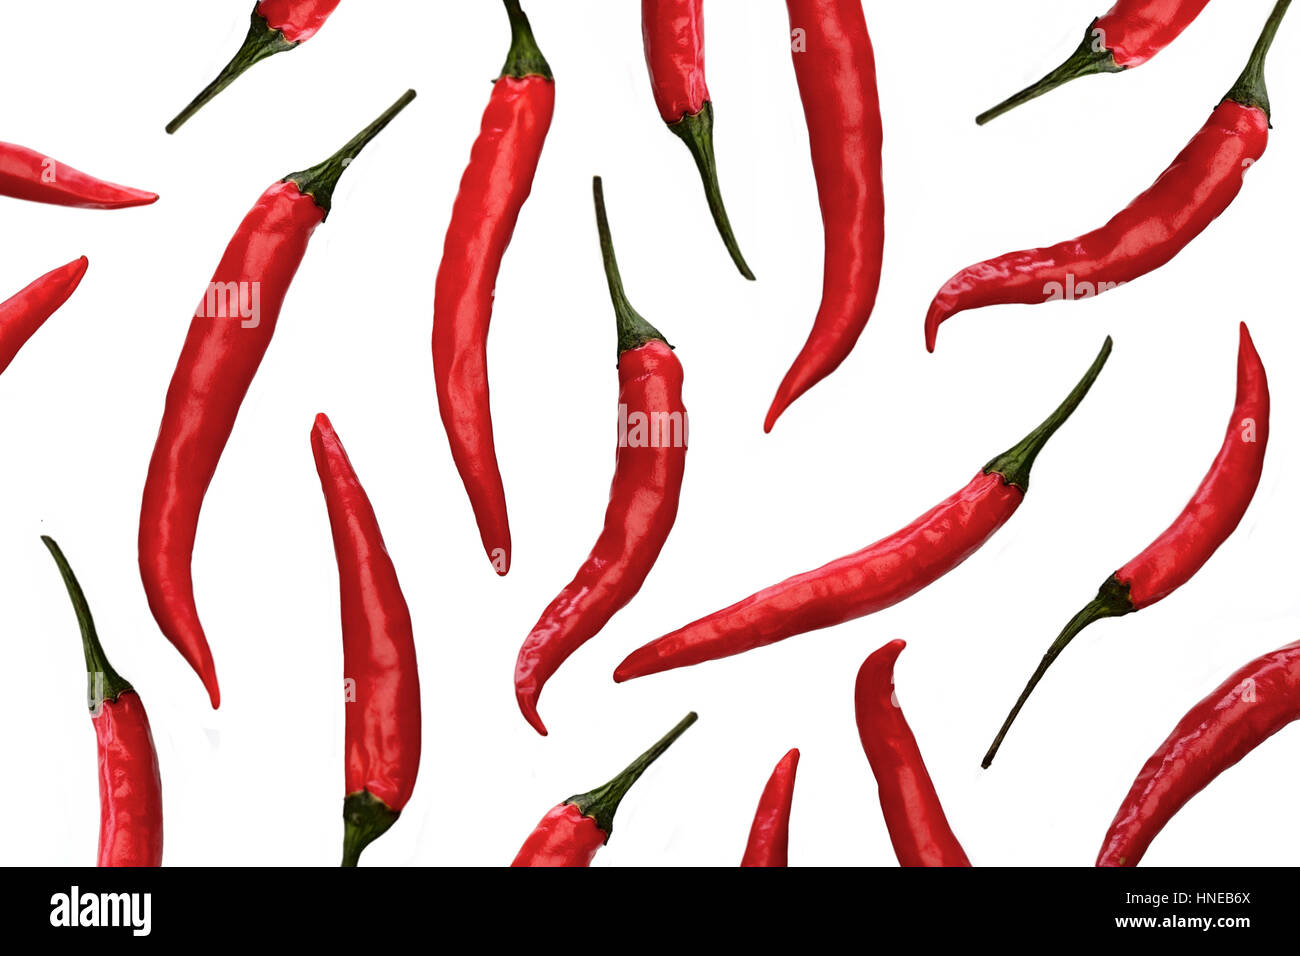 Red chili peppers on white background Stock Photo